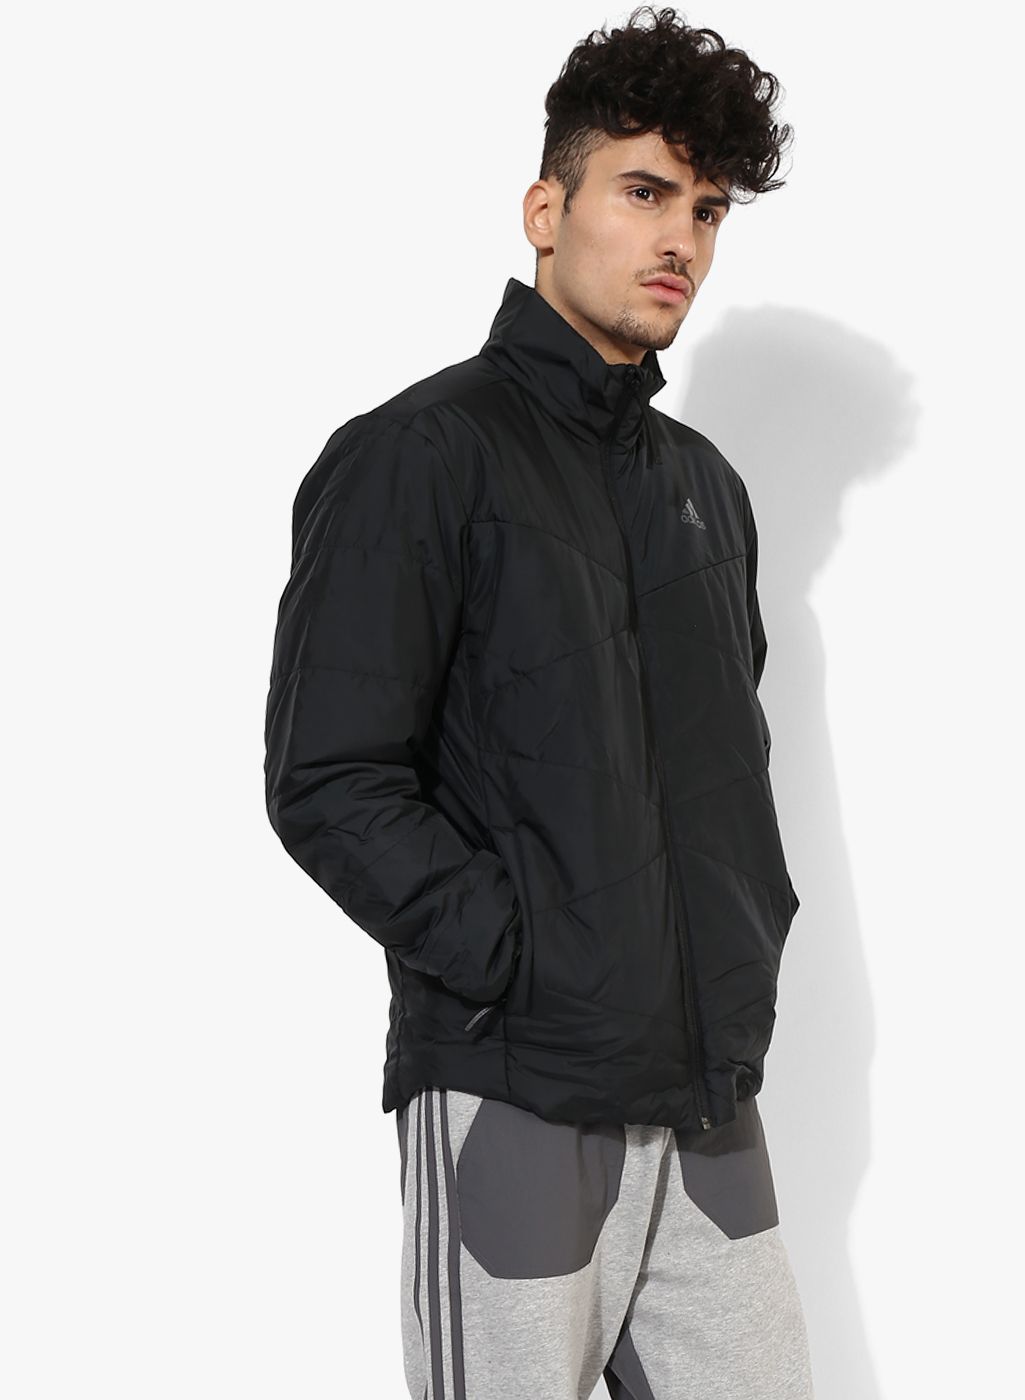 Adidas Jackets for Men - Buy Adidas Men Jackets Online in India